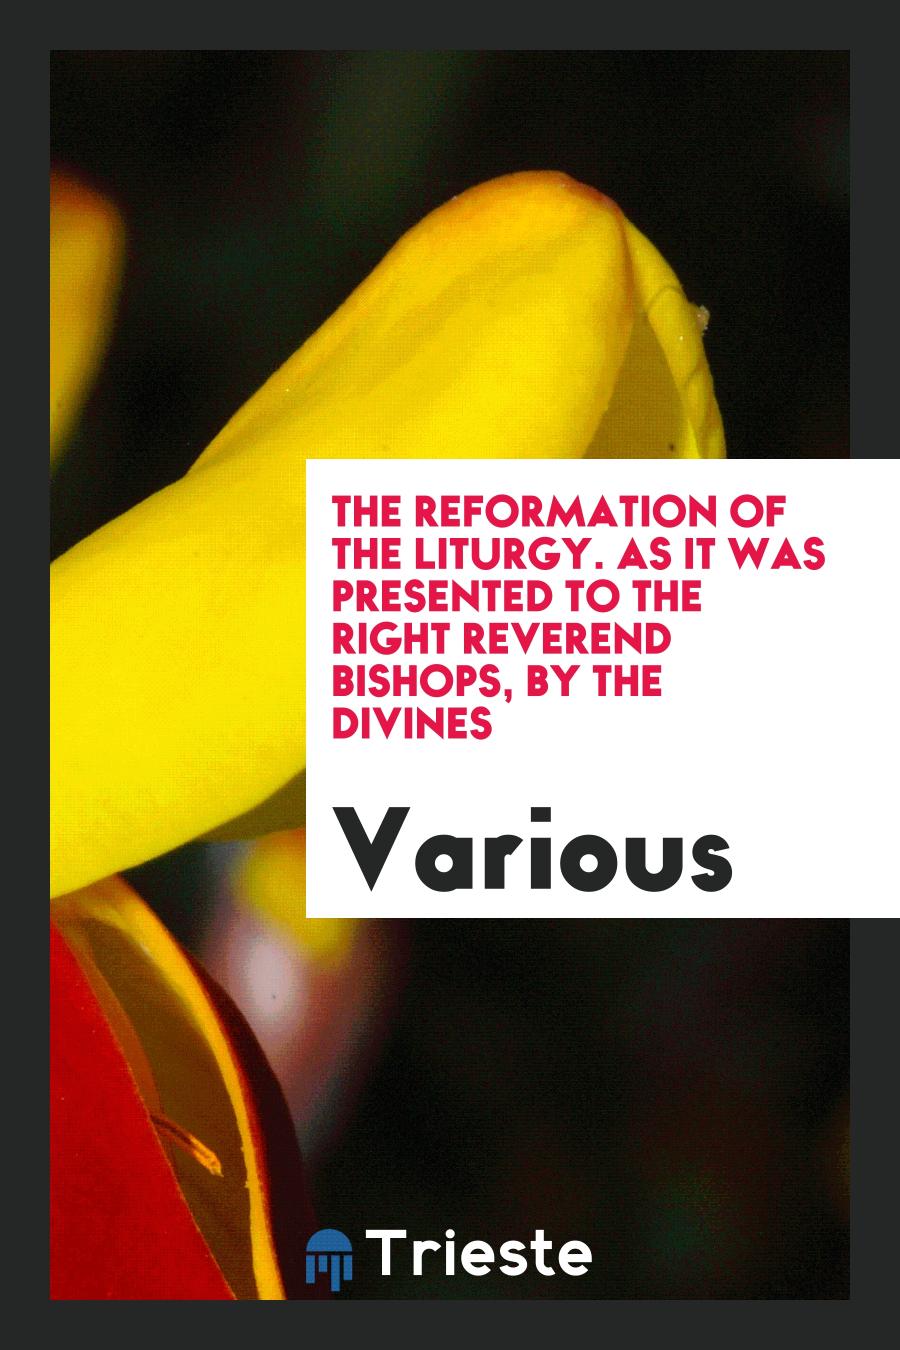 The Reformation of the Liturgy. As it was Presented to the Right Reverend Bishops, by the Divines